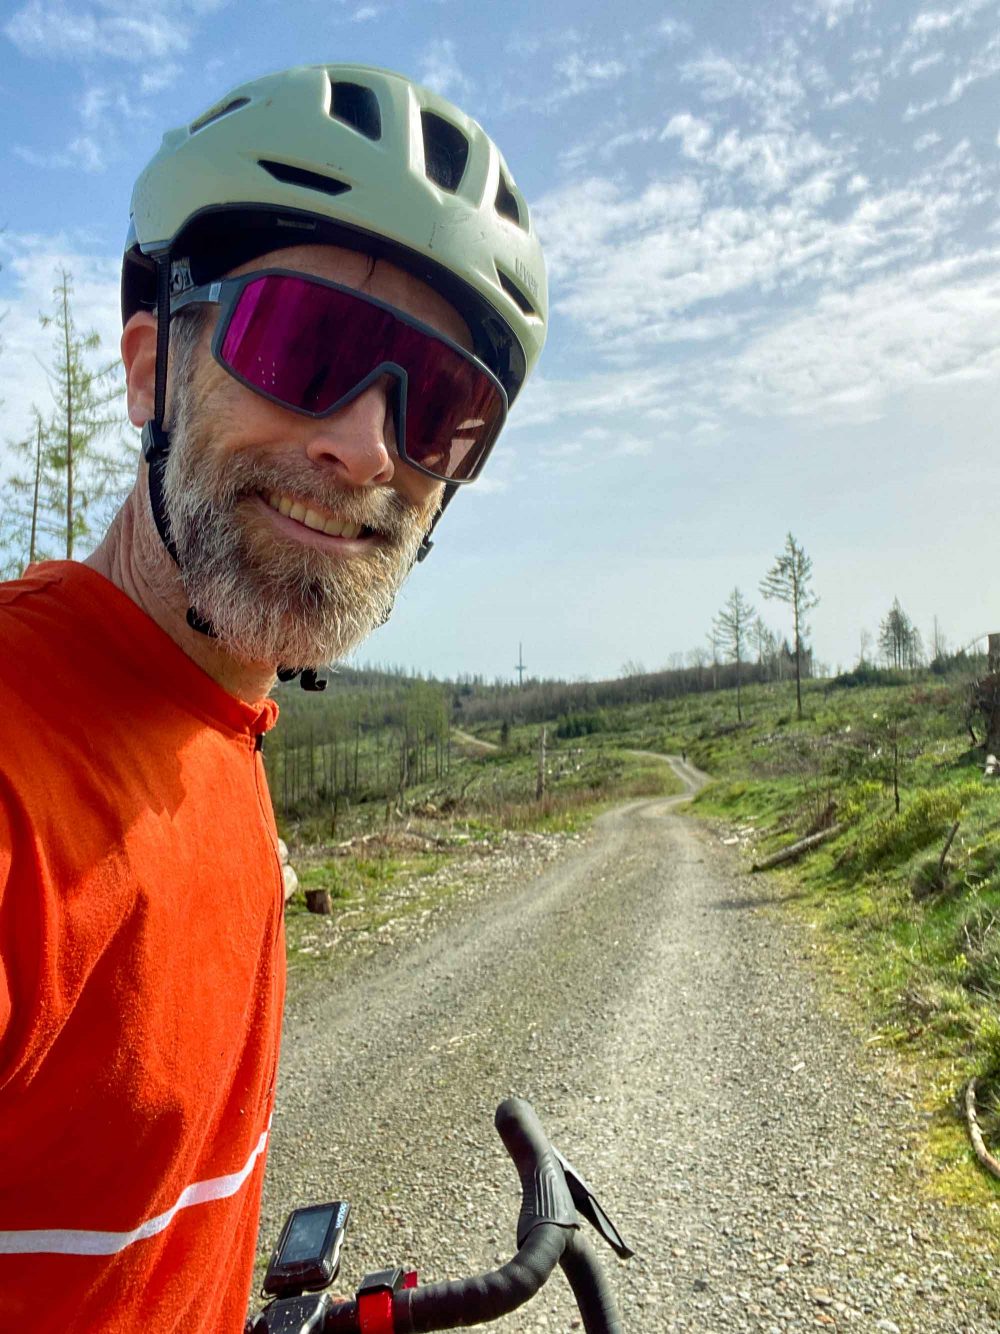 The ridefar 2024 route from lifecycle magazine is unfortunately still a little bare here and there. But believe me: it's still fun and the gravel paths, most of which have been completely resurfaced, are the very best!